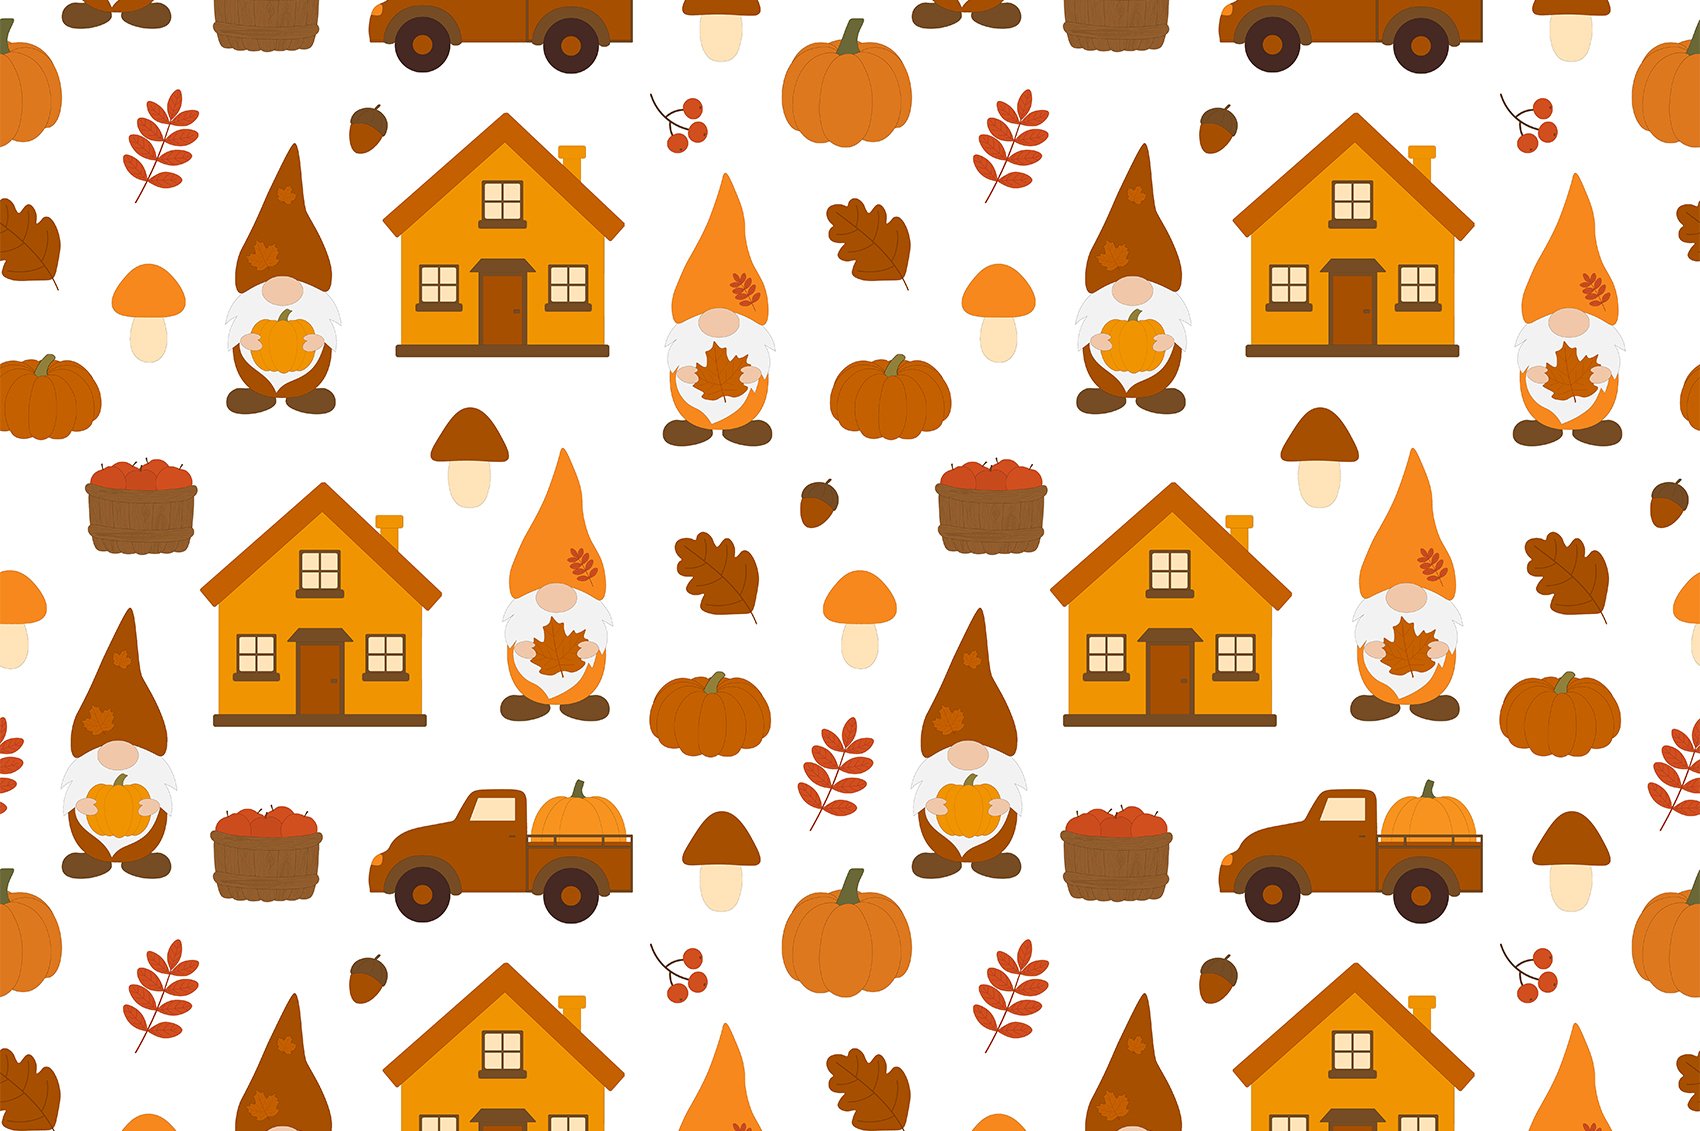 Houses and cars are ready for your fall illustration.